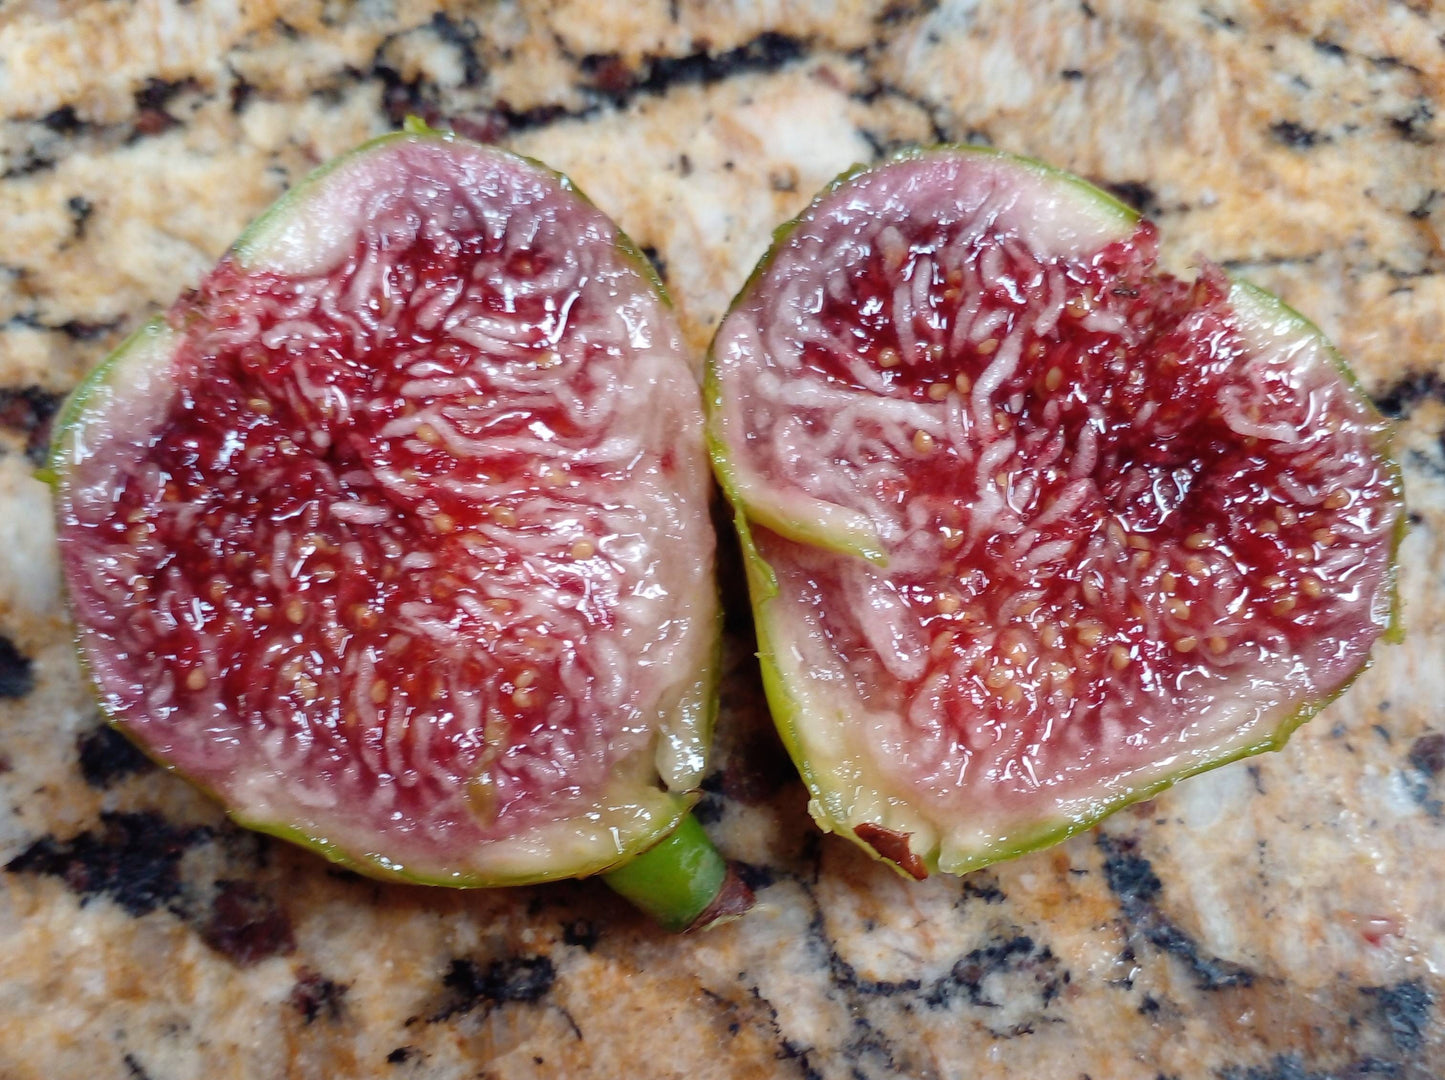 Pote Tresa Fig Tree - 2 Cuttings - Delicious Swiss Fig with Beautiful Coloring